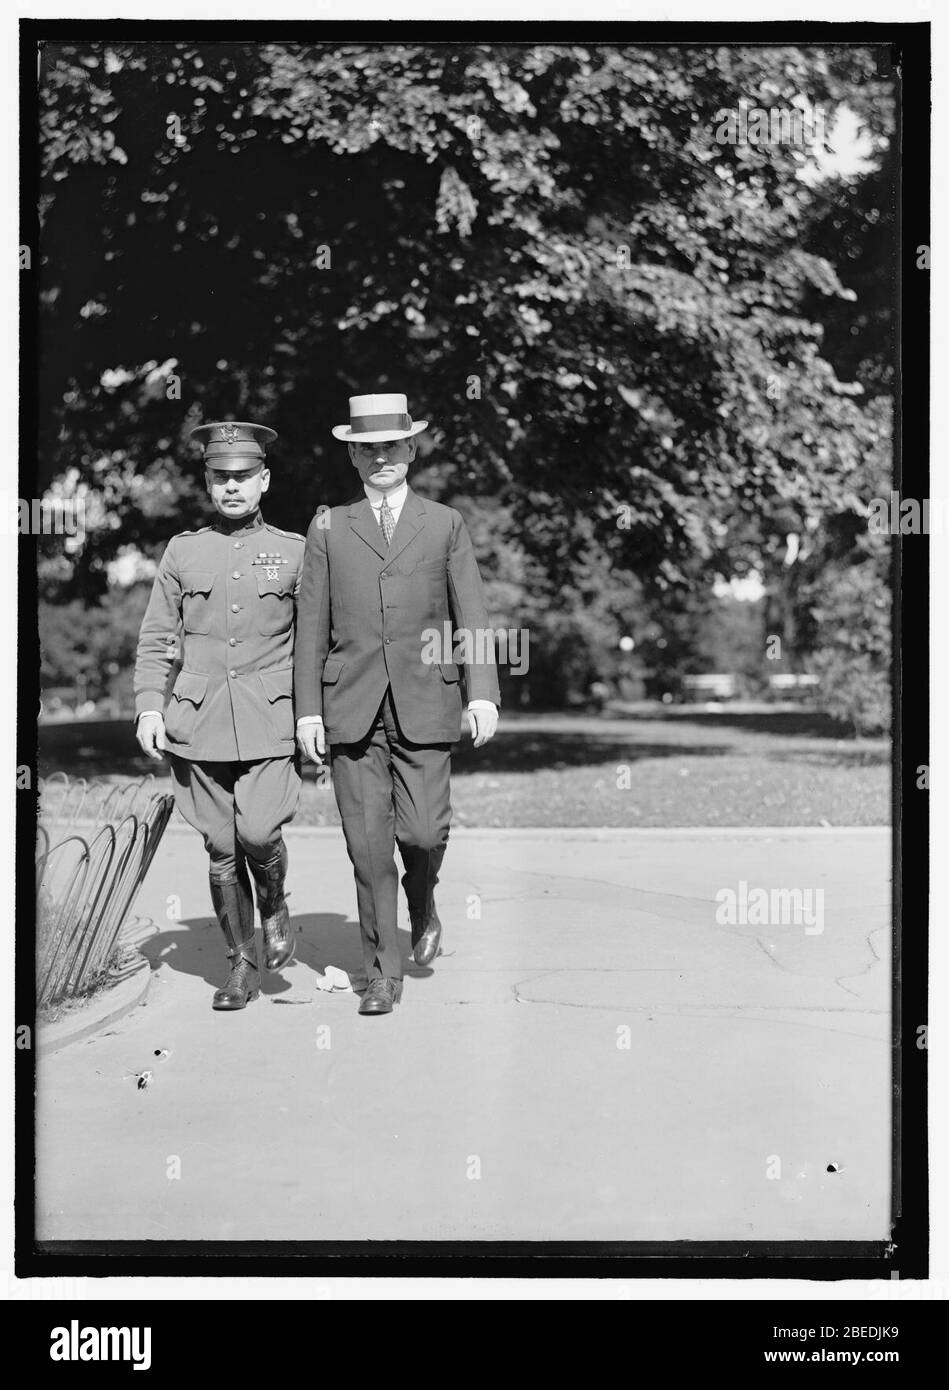 HARRIS, PETER CHARLES. MAJOR GENERAL, U.S.A. LEFT, WITH BROTHER, SEN. WILLIAM J. HARRIS, DIRECTOR OF CENSUS, 1913-1915; FEDERAL TRADE COMMR., 1915-1918; SENATOR FROM GEORGIA, 1919-1925 Stock Photo